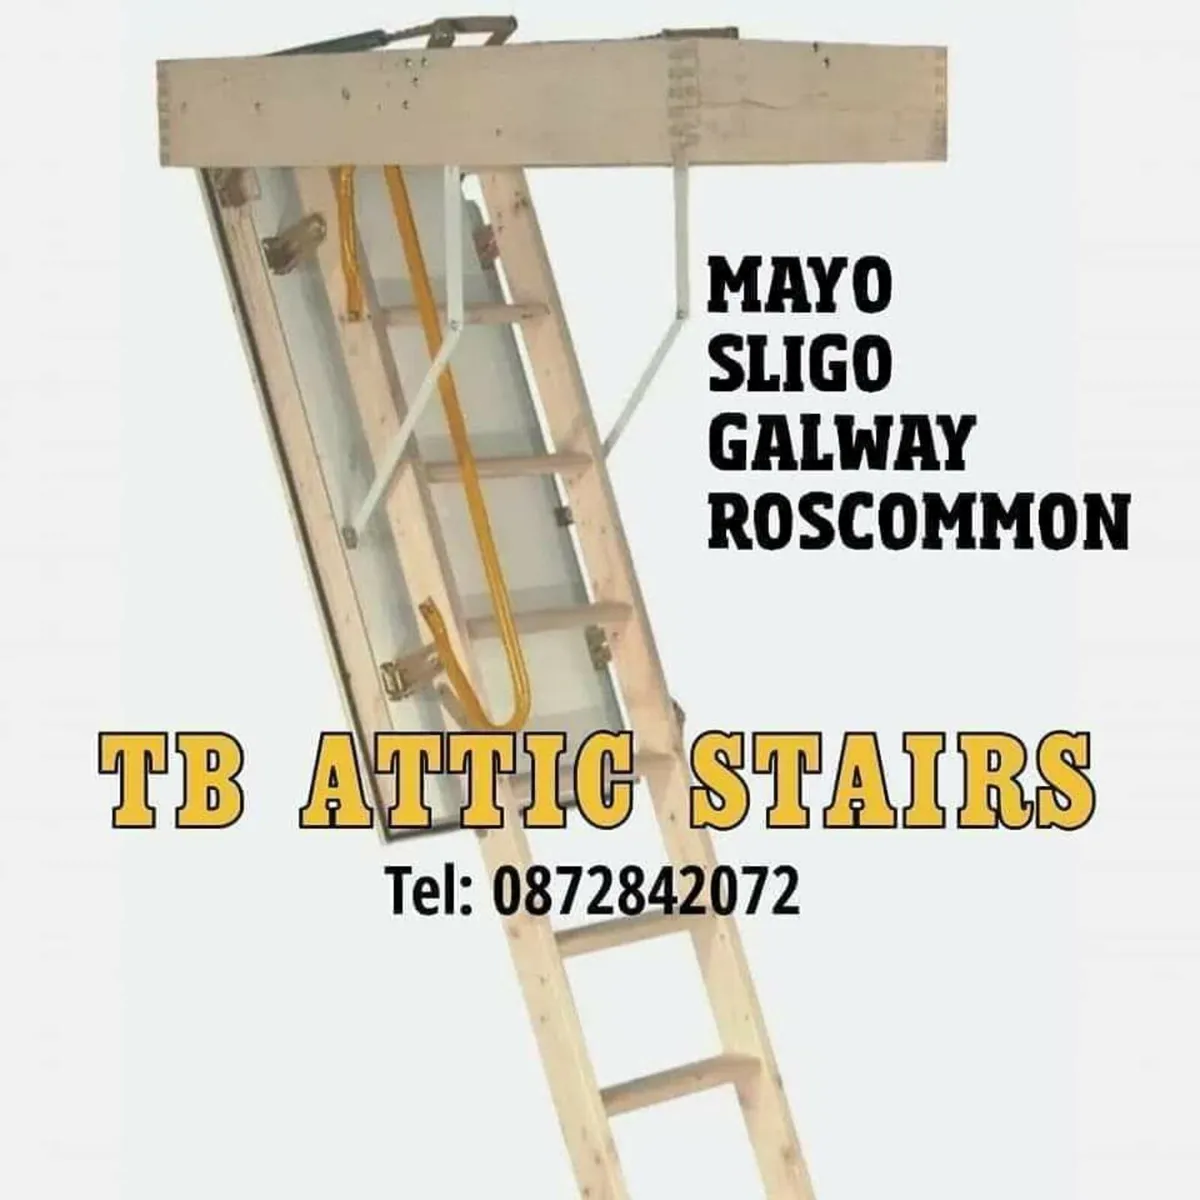 Insulated Attic Stairs - Image 1